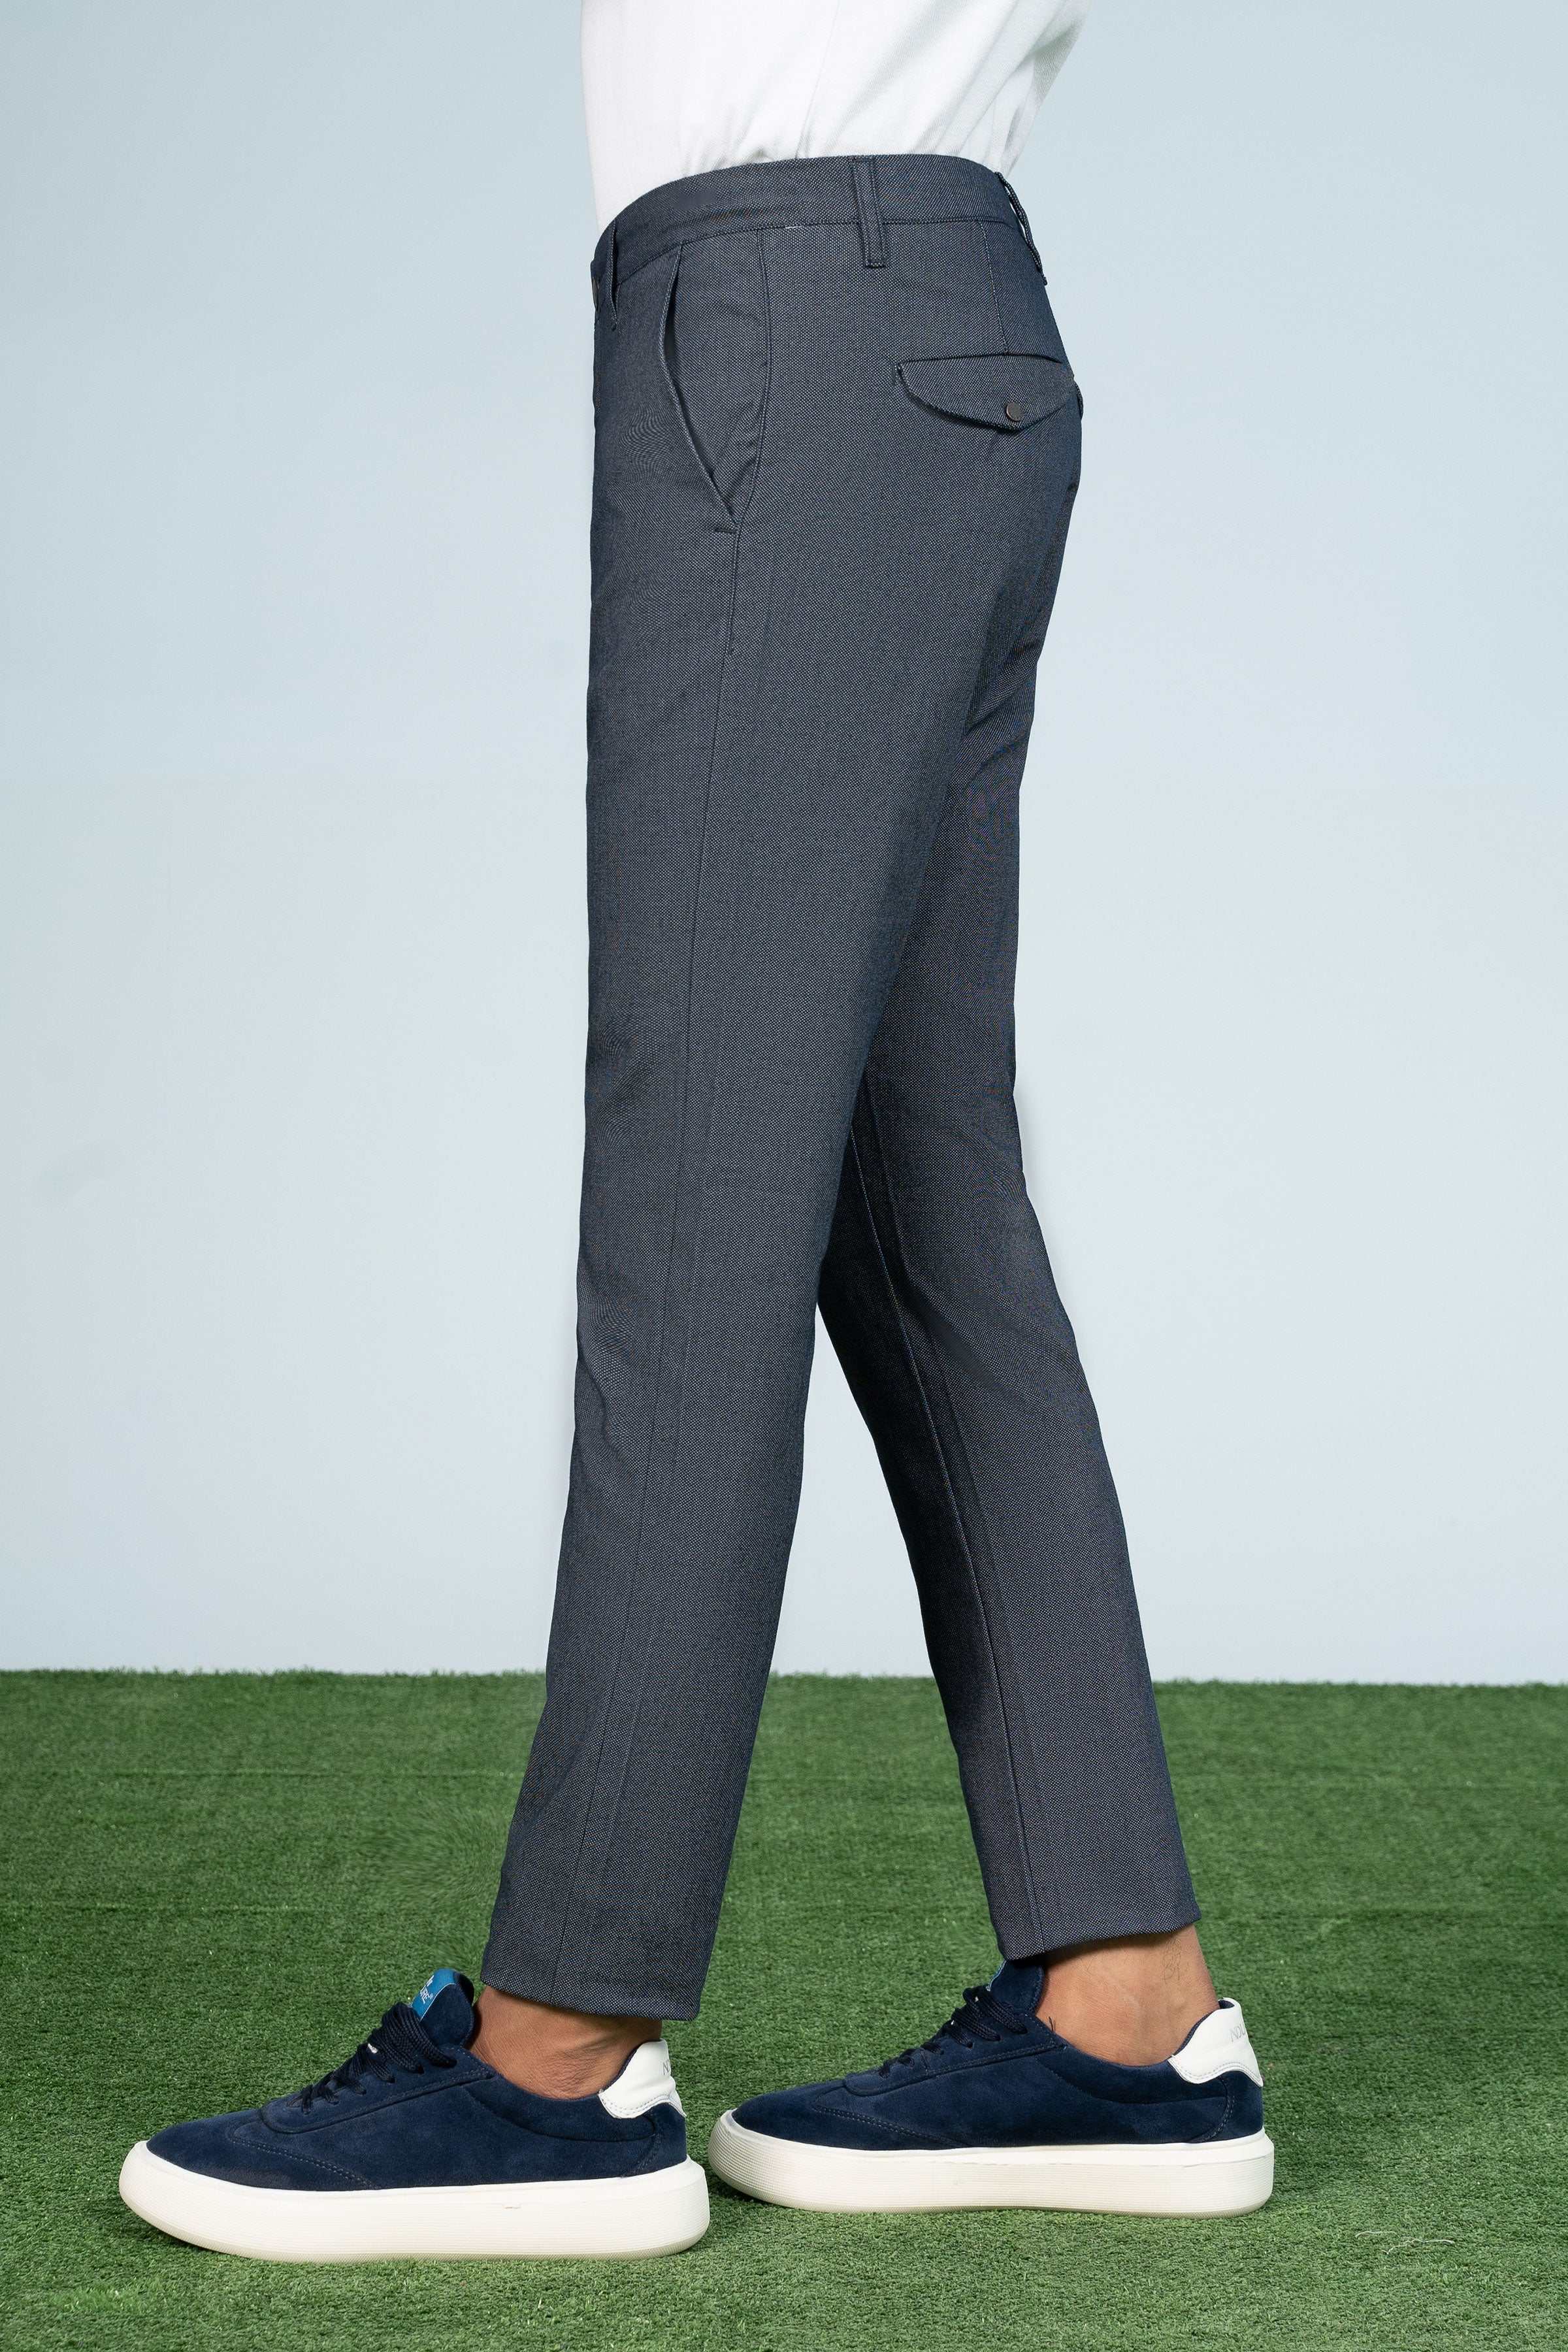 CROSS POCKET TEXTURED PANT NAVY - Charcoal Clothing